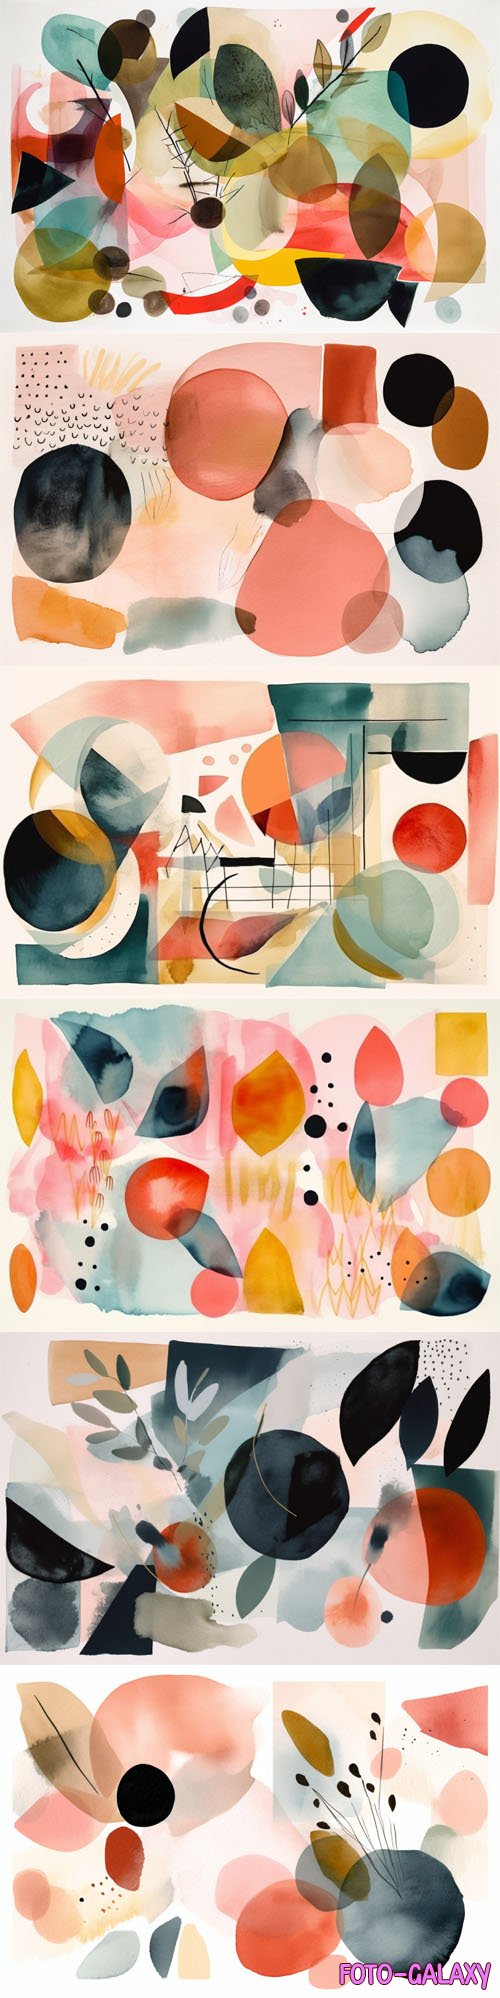 Modern Abstract Shapes Collection